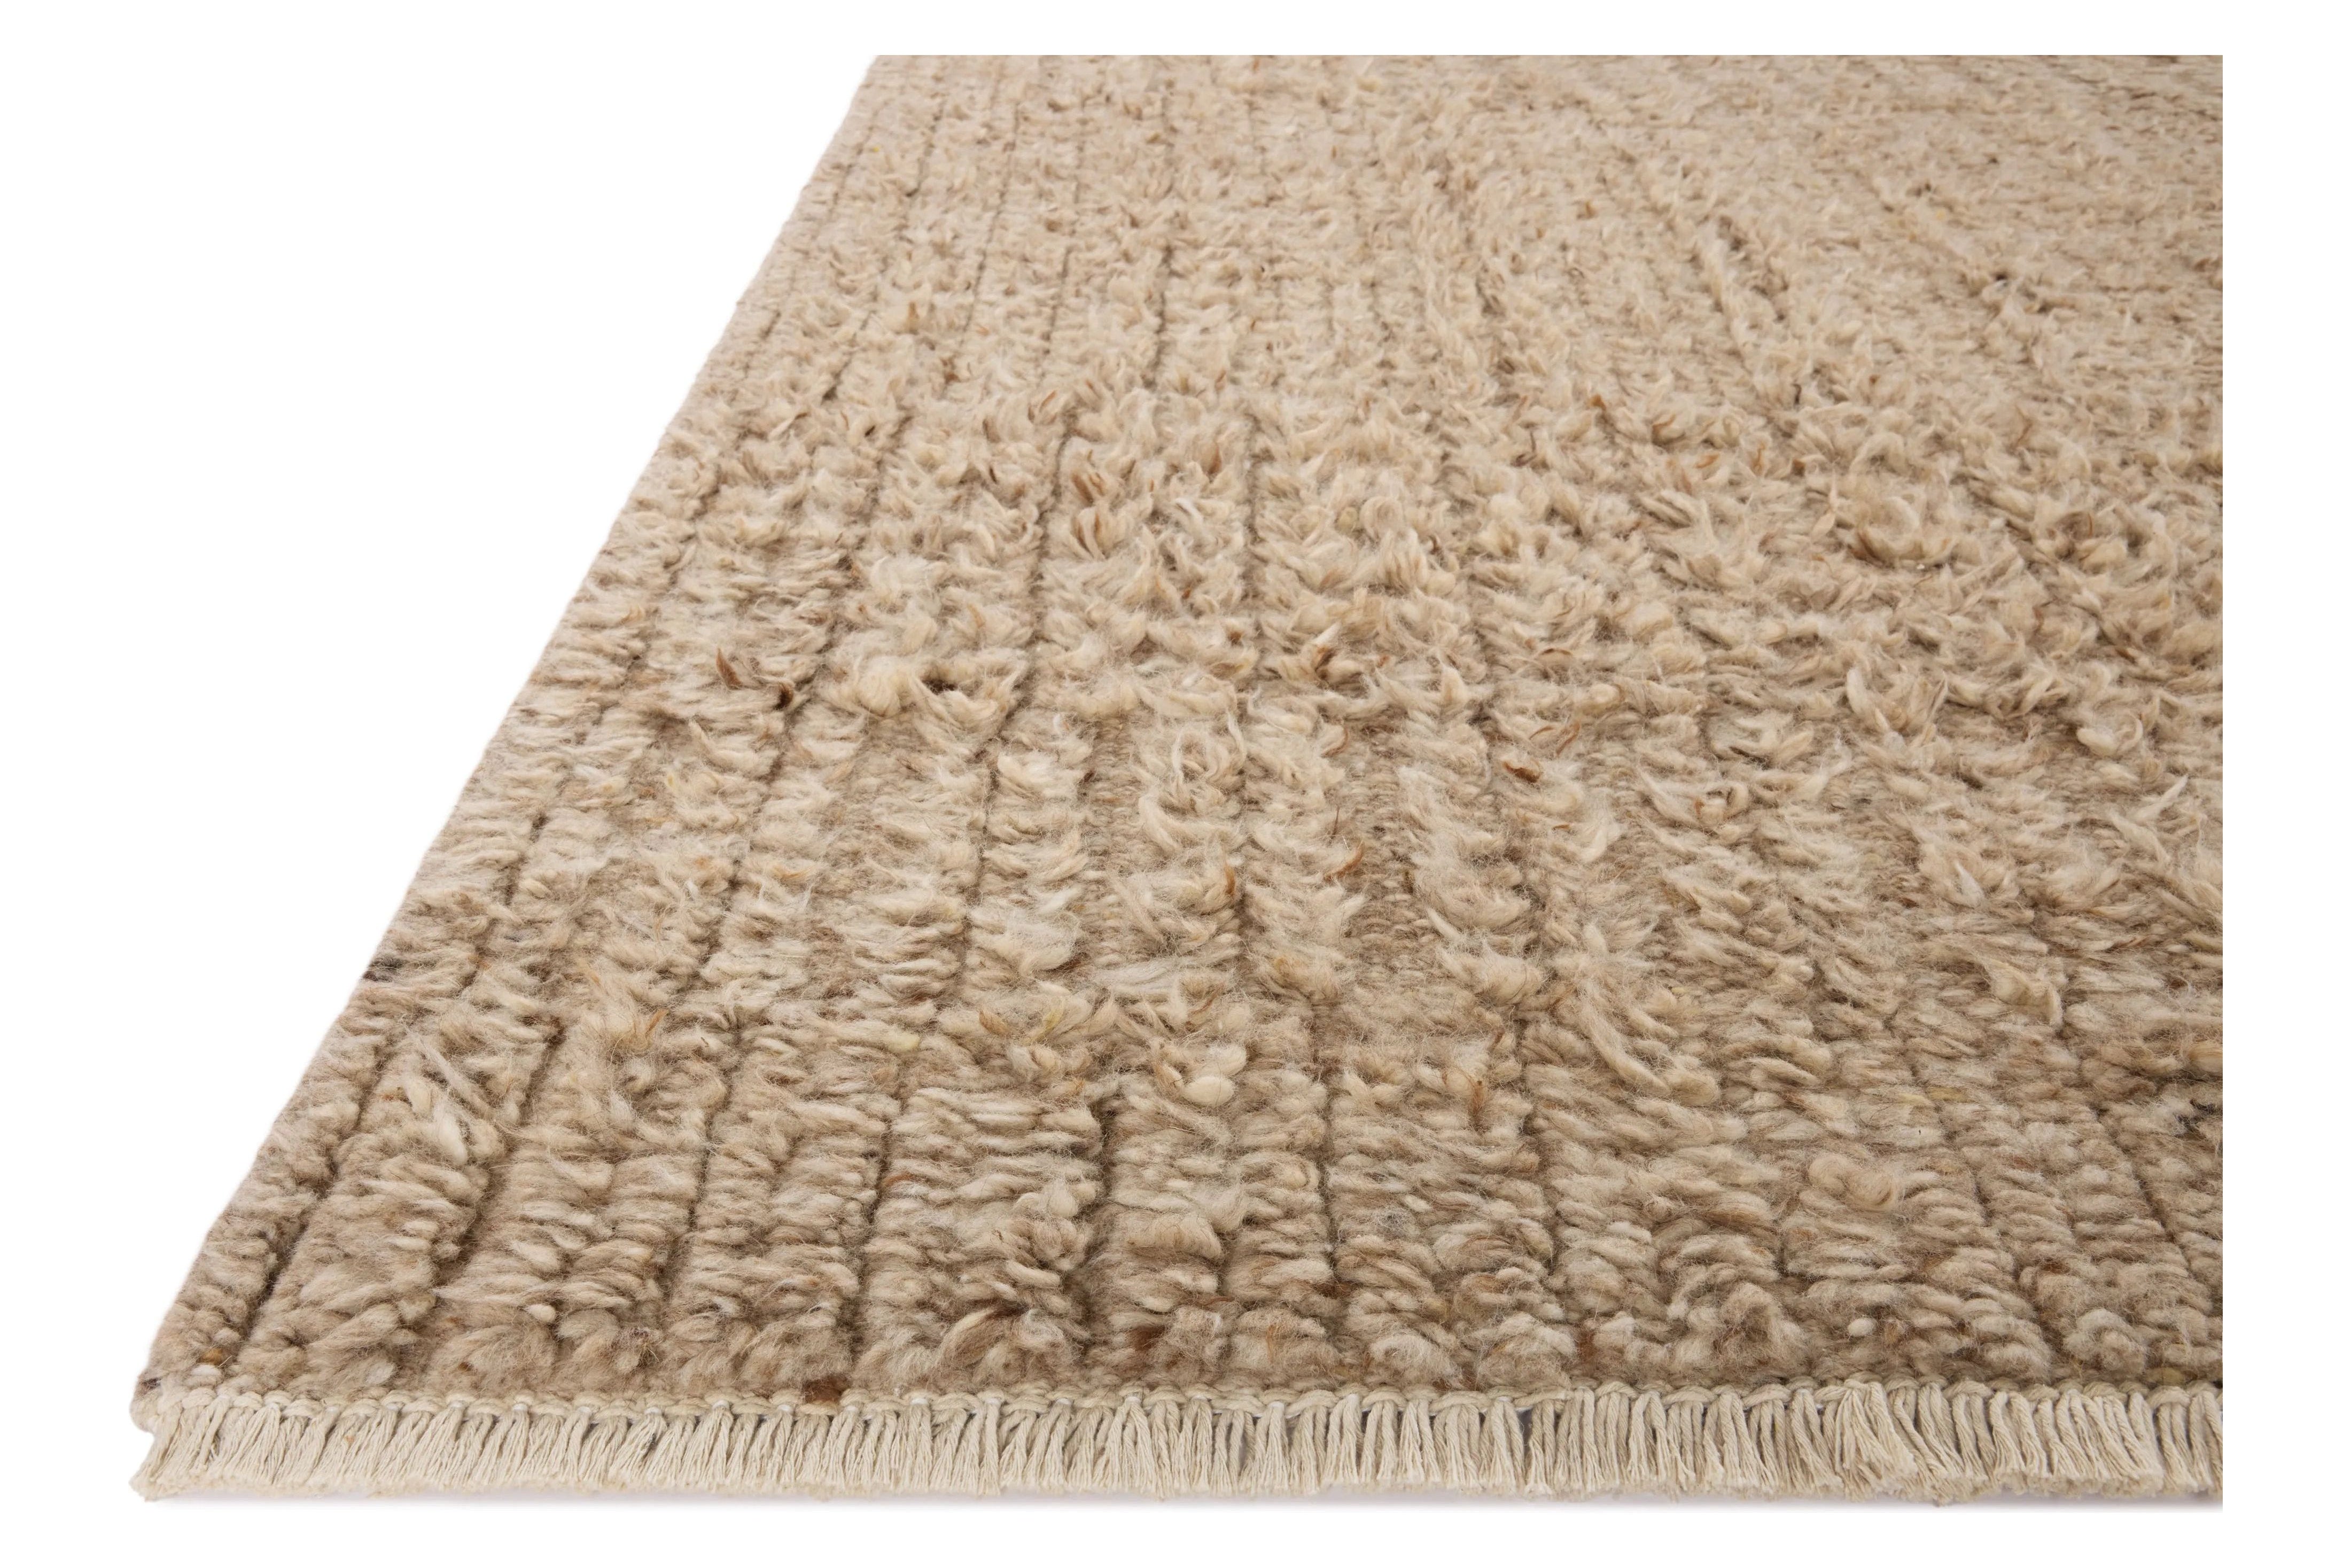 Irresistible to walk upon, the Dana Sand Rug by Brigette Romanek x Loloi has a high-low texture that alternates between a subtly shaggy pile and a soft base. Horizontal broken stripes give the area rug a fresh and energized structure, while a finish of fringe along the edges accentuates its sense of movement. Amethyst Home provides interior design, new home construction design consulting, vintage area rugs, and lighting in the Newport Beach metro area.